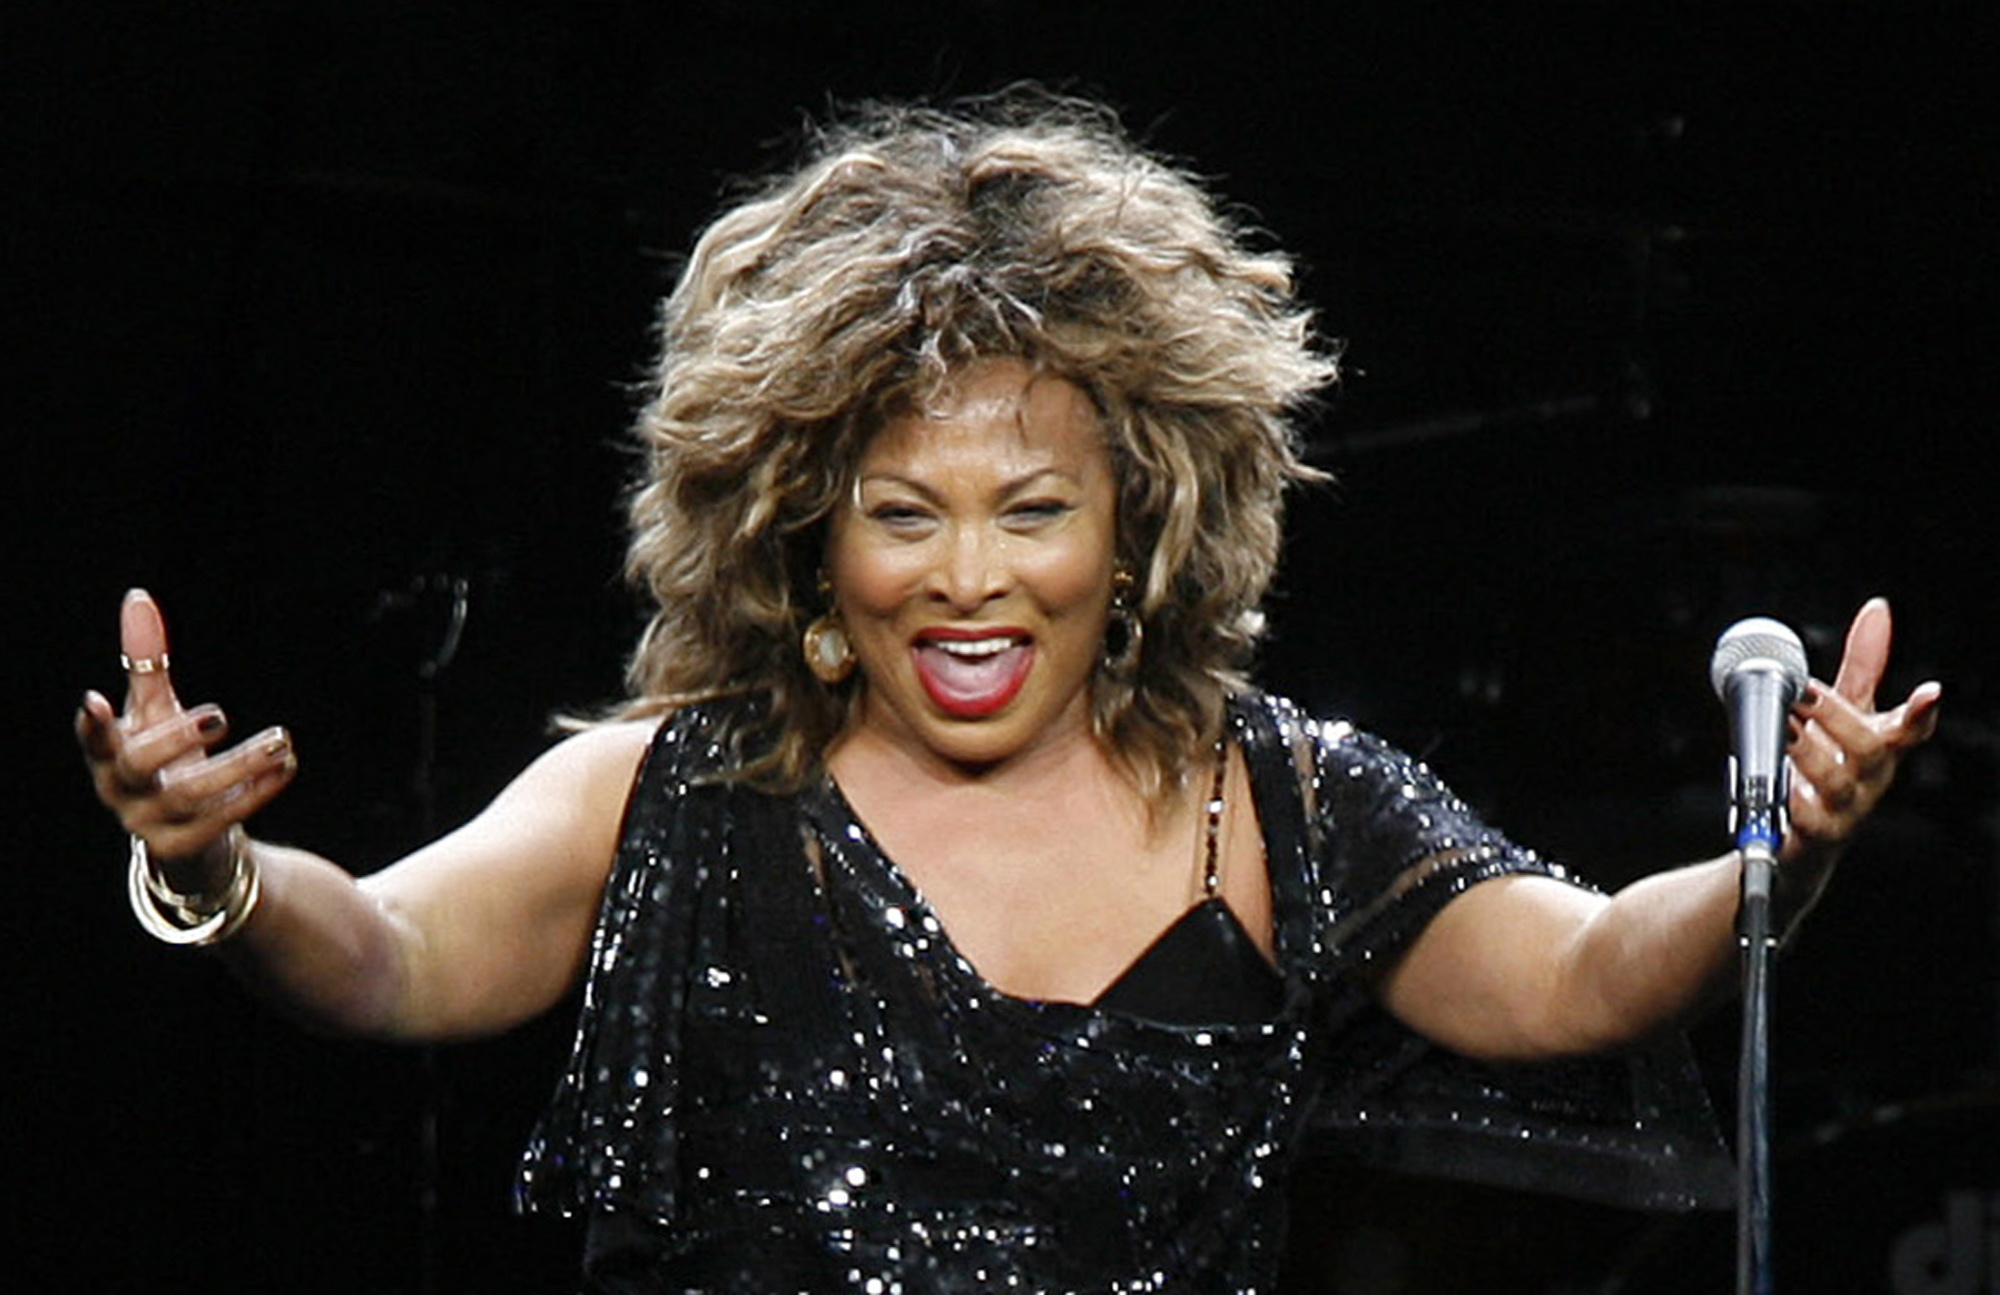 Tina Turner performs in a concert in Cologne, Germany, on Jan. 14, 2009. Turner, the unstoppable singer and stage performer, died Tuesday after a long illness at her home in Küsnacht near Zurich, Switzerland, according to her manager. She was 83. Photo credit: Hermann J. Knippertz, The Associated Press